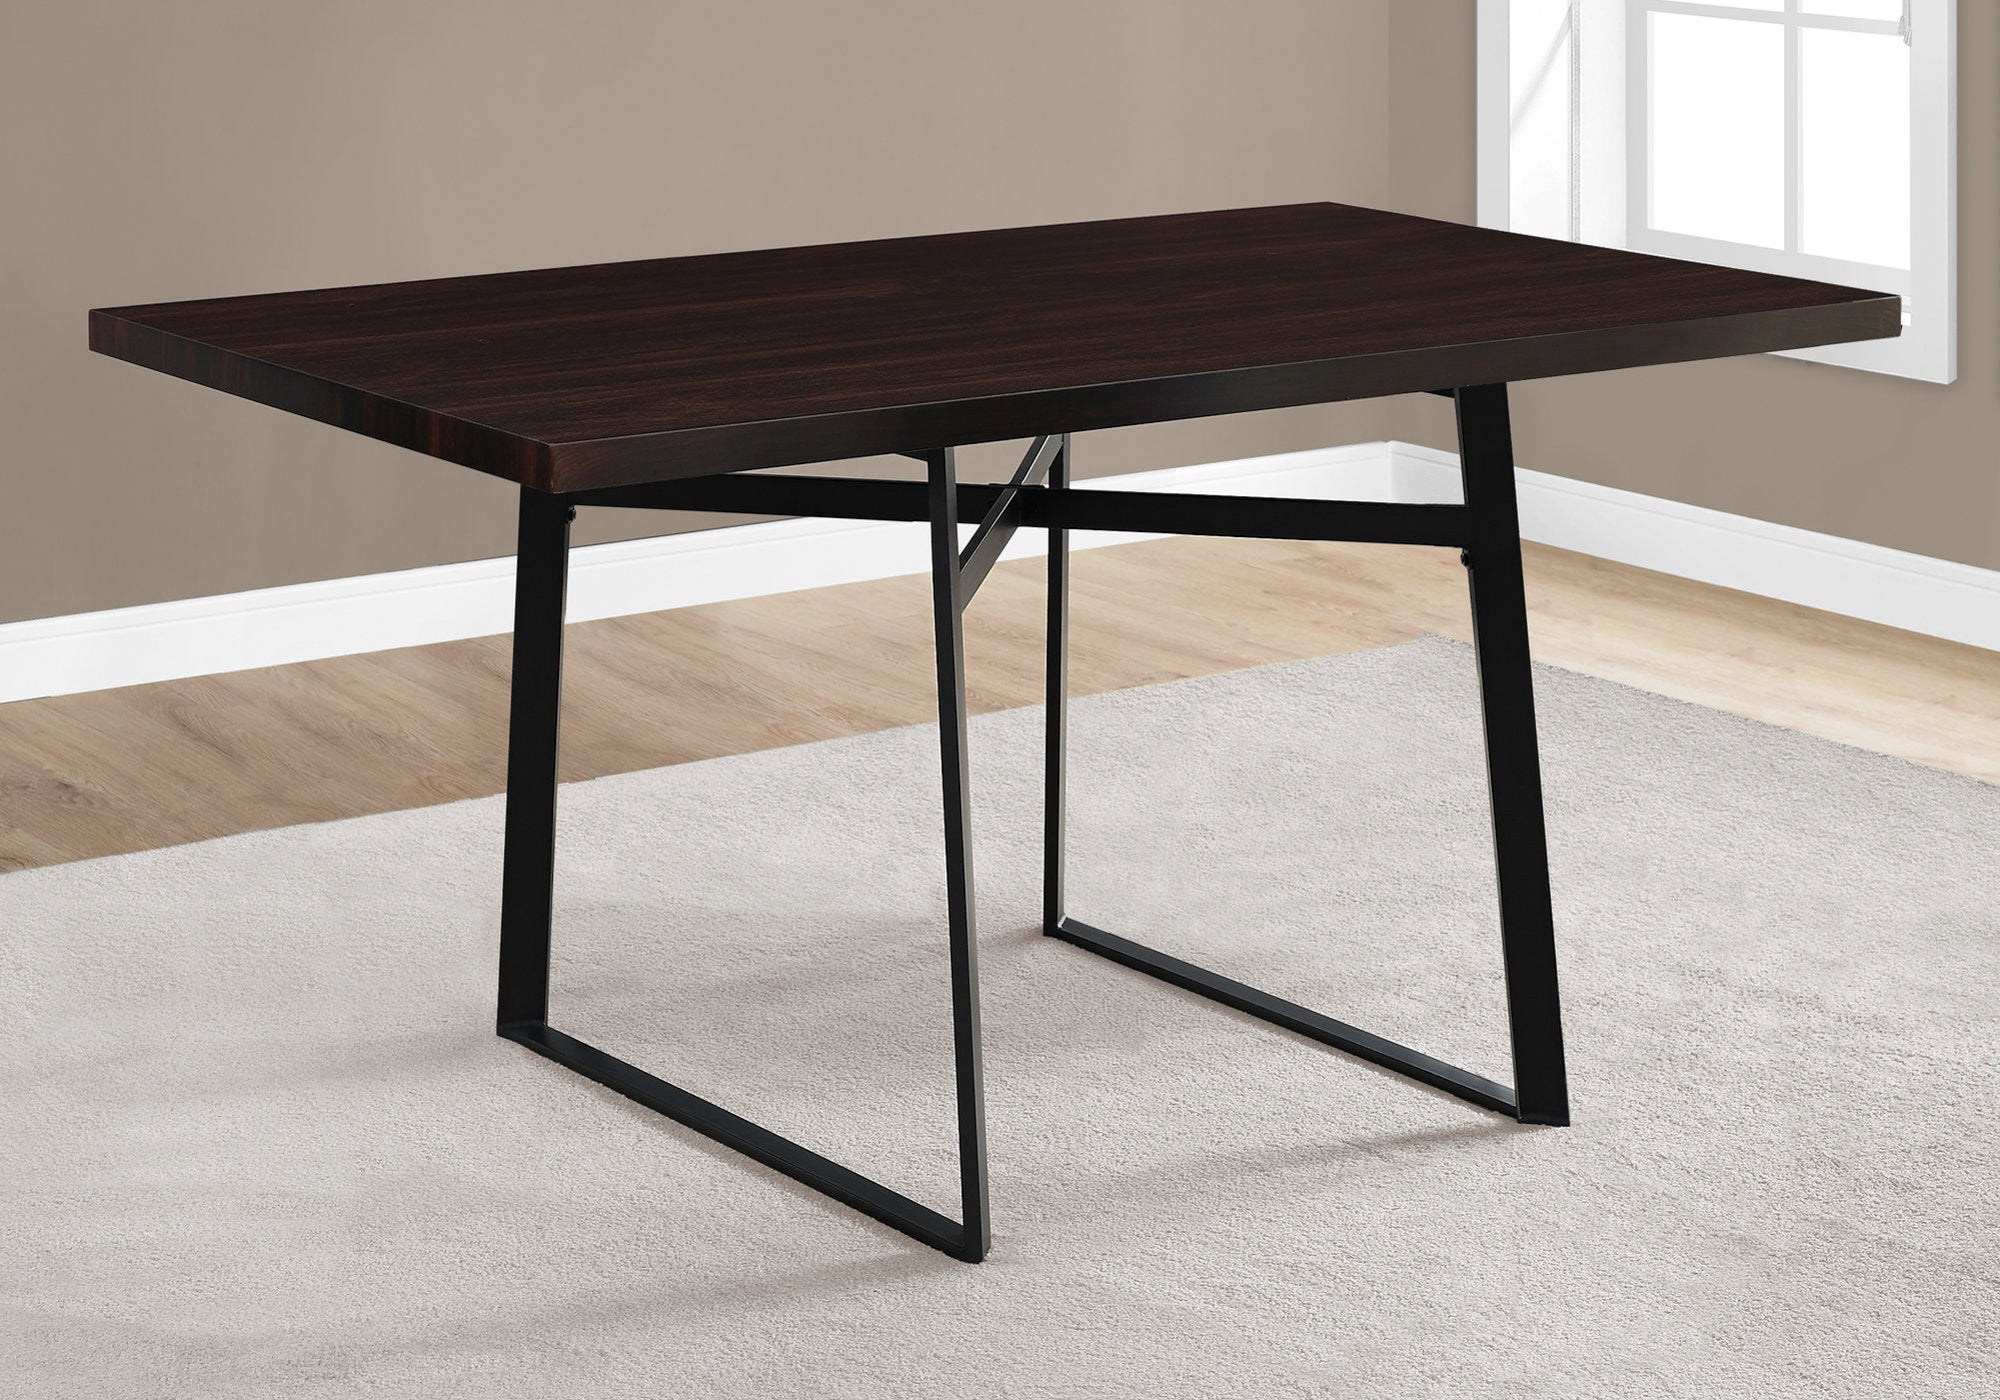 Espresso Finished 36" x 60" Elegant Dining Table With Sturdy Metal Legs